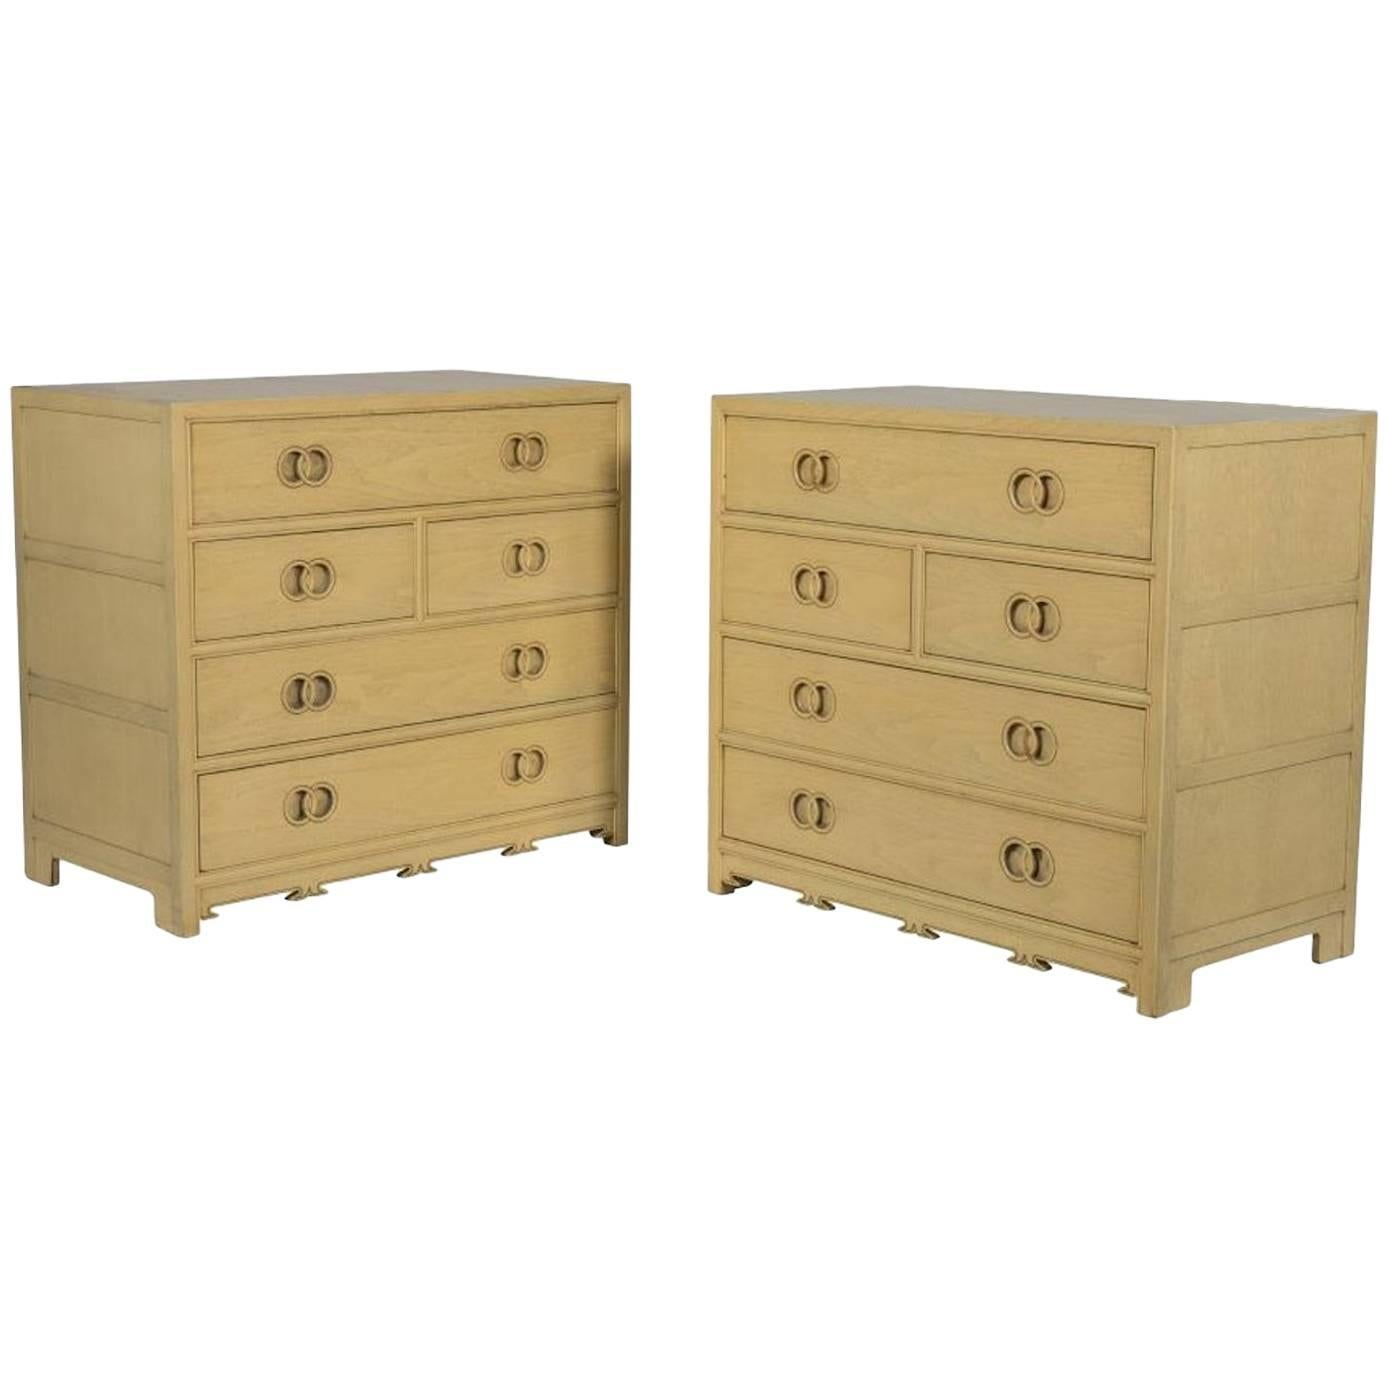 Pair of Baker Bachelor Chests from New World Collection